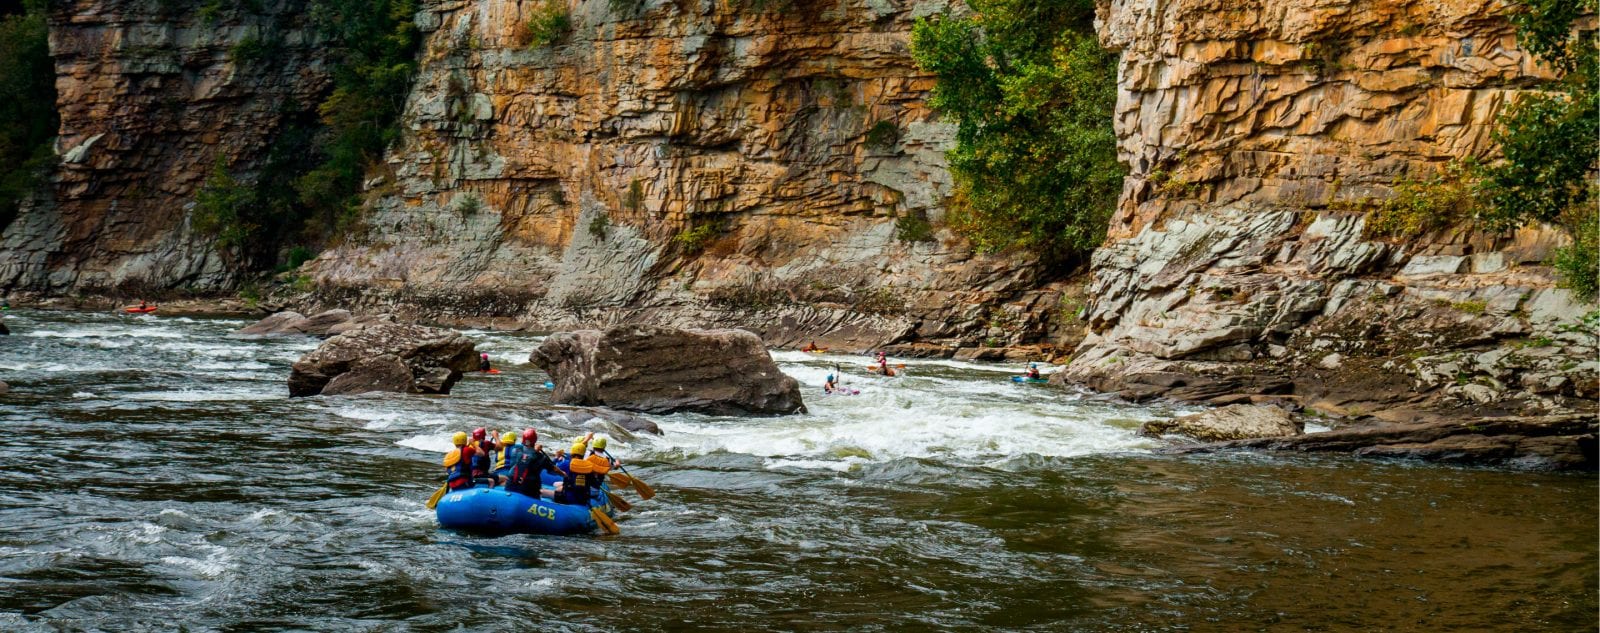 A raft enters cliffside rapid next to scenic cliff walls on a Lower Gauley River rafting trip.